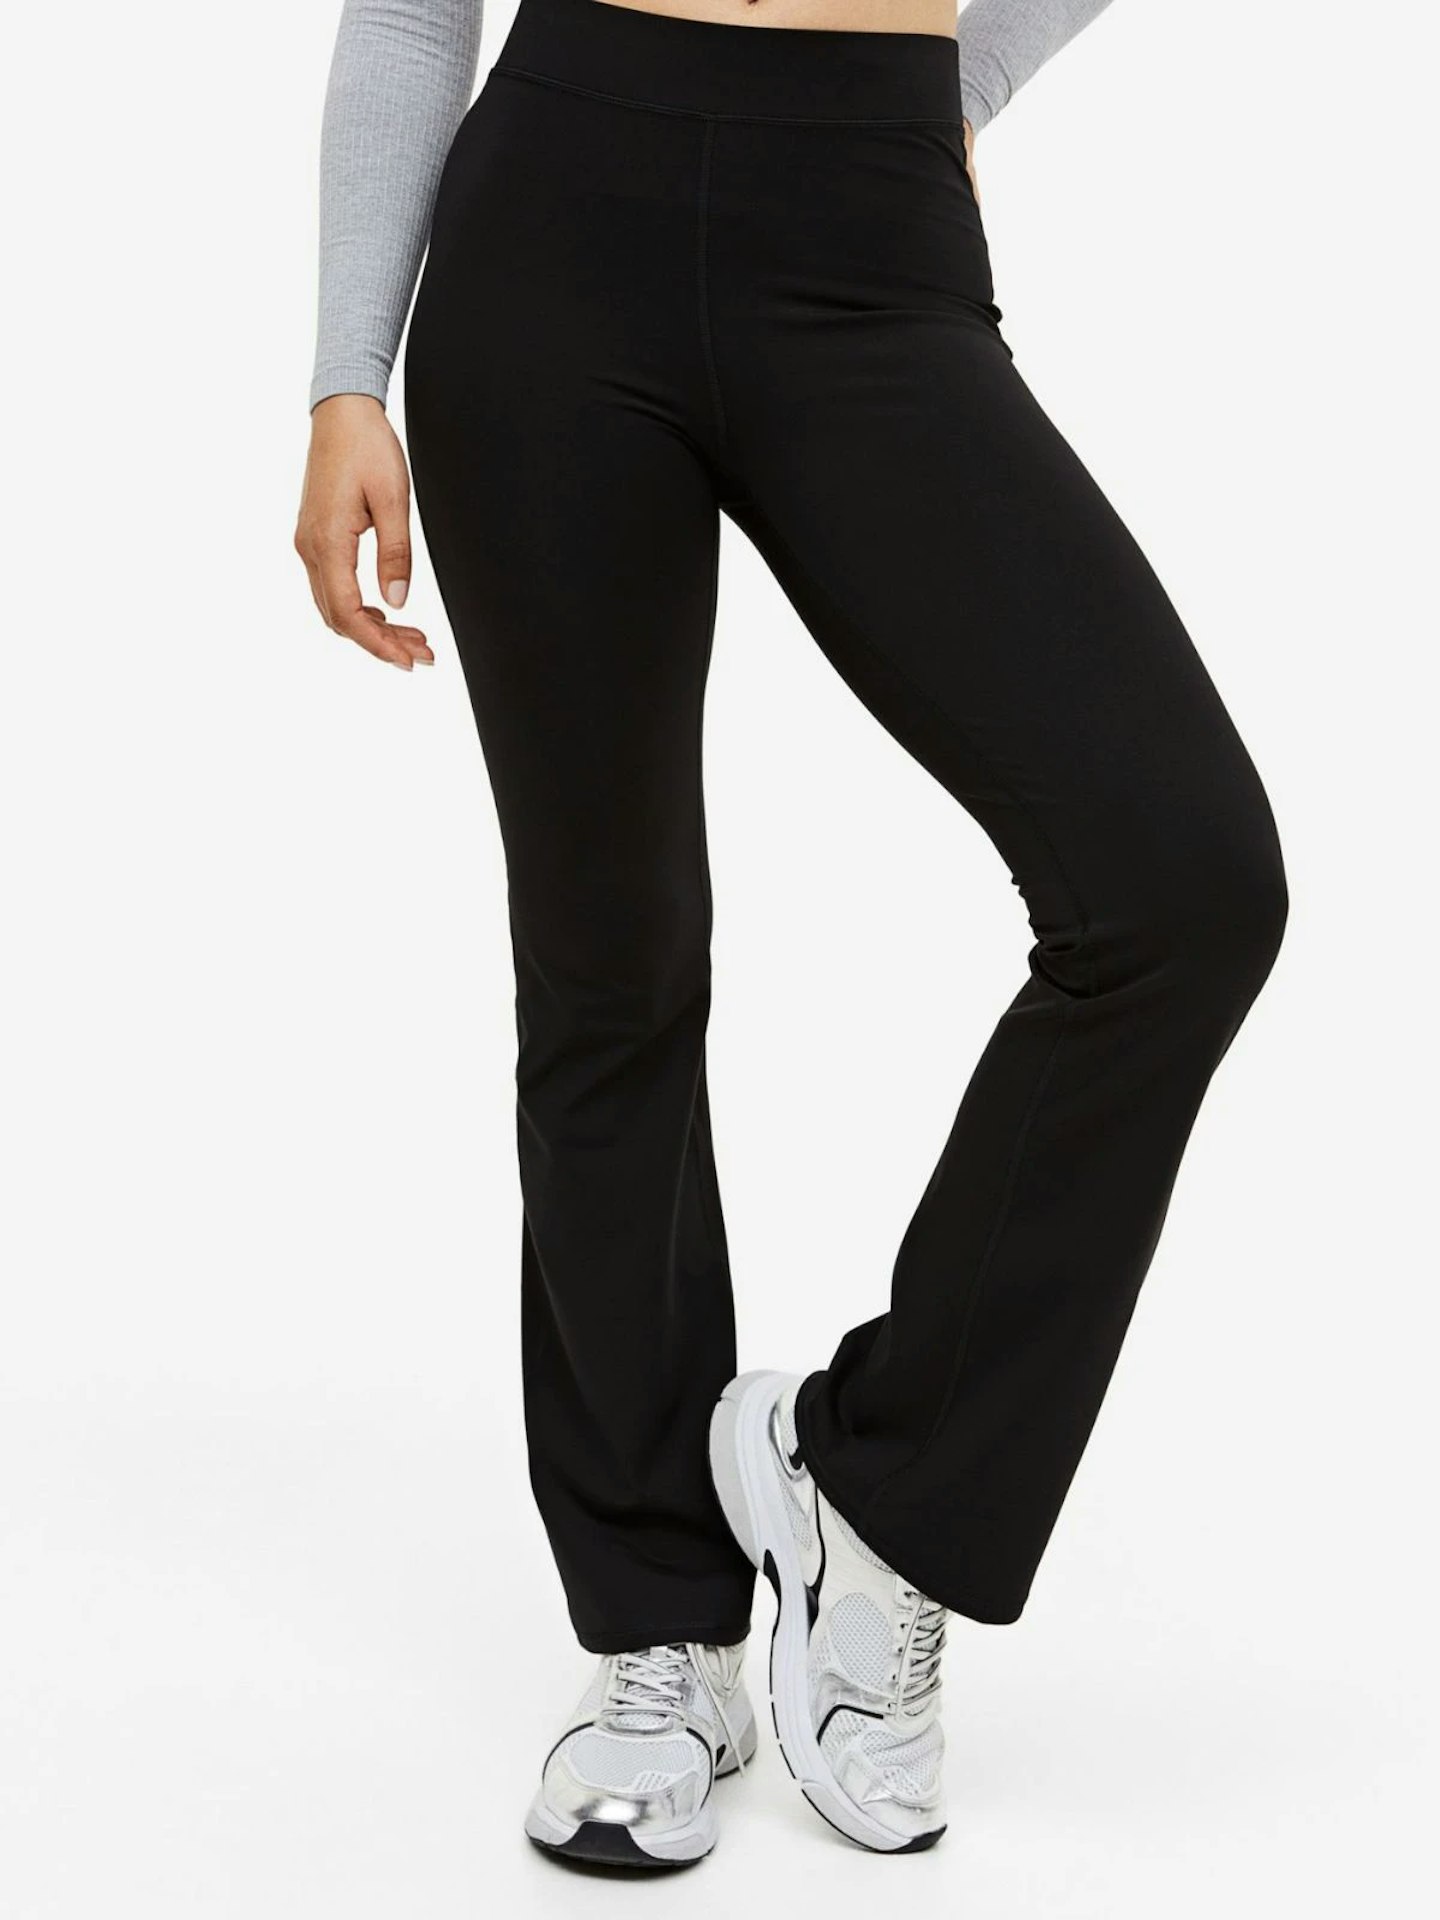 AFFORDABLE LULULEMON LEGGING DUPES?!, Gallery posted by ling